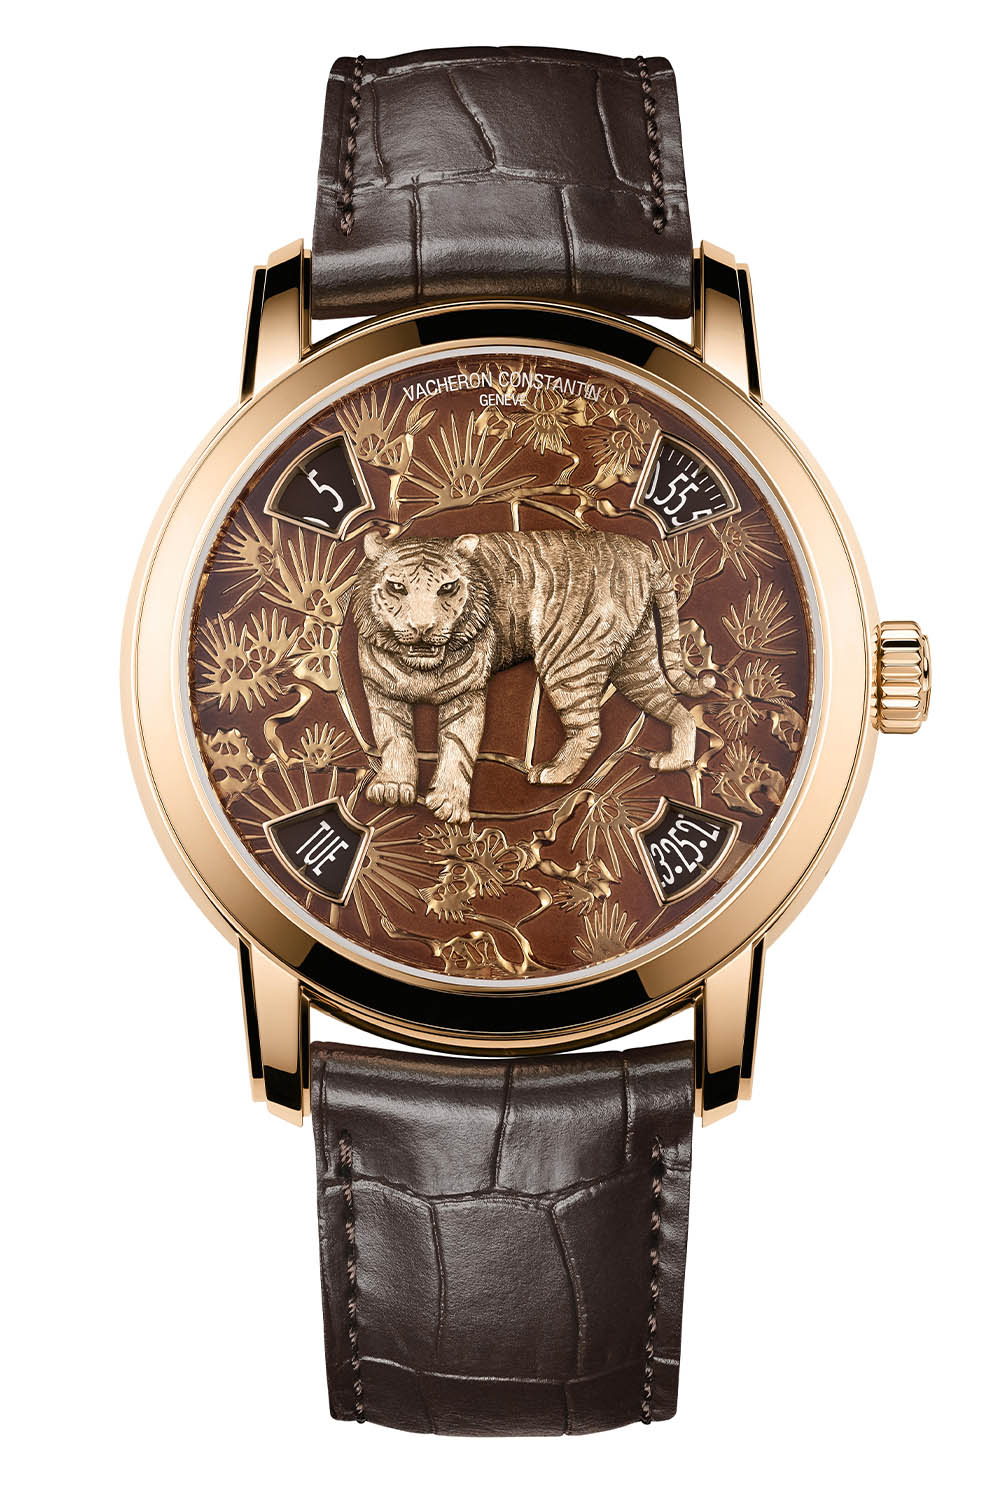 Vacheron Constantin Metiers dâ€™Art The legend of the Chinese zodiac - Year of the tiger